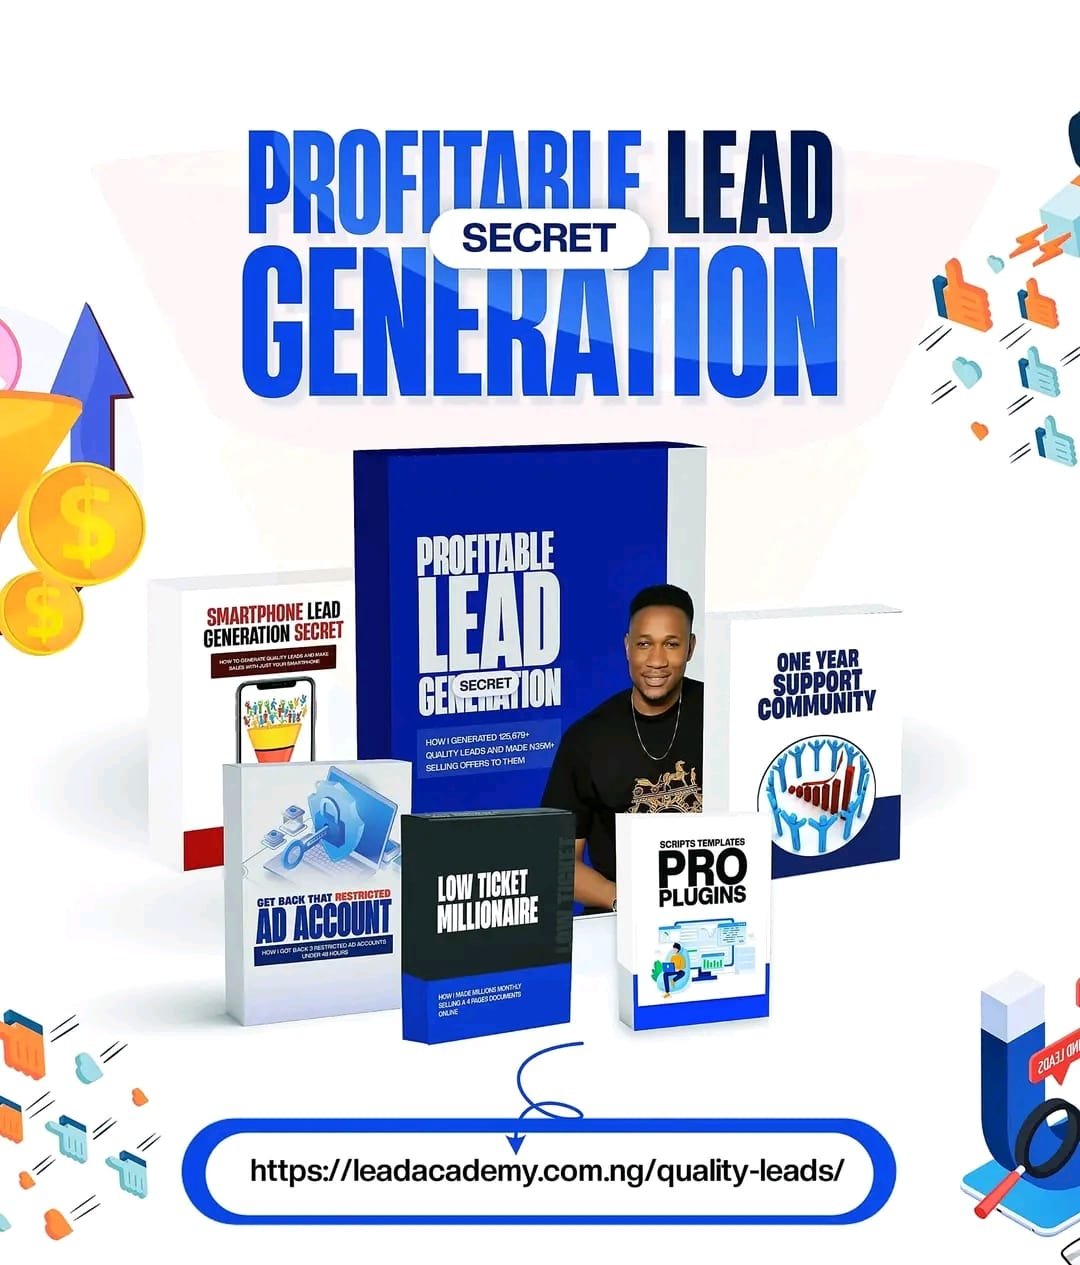 Profitable Lead Generation Secrets: Everything You Need To Generate Hot Leads And Make Massive Sales Online